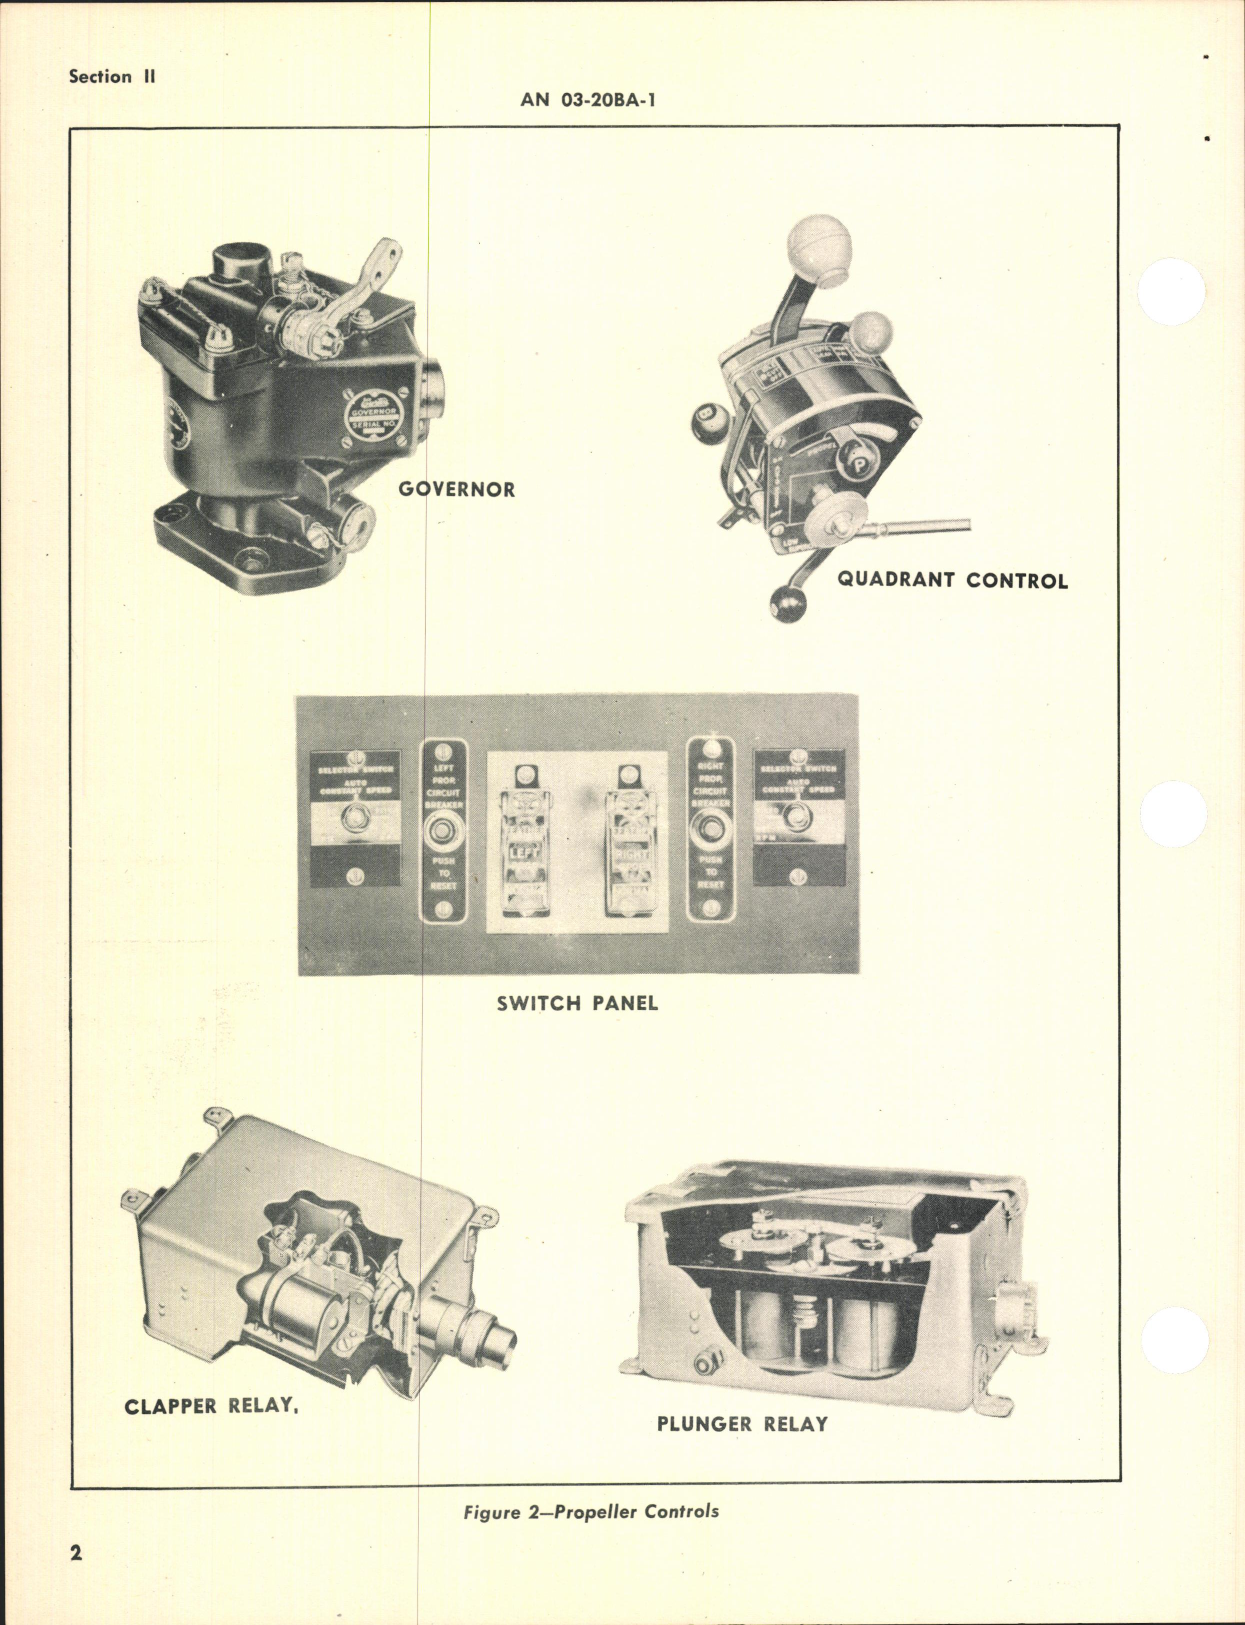 Sample page 6 from AirCorps Library document: Operation, Service, & Overhaul Instructions for Proportional Governor Propeller Controls